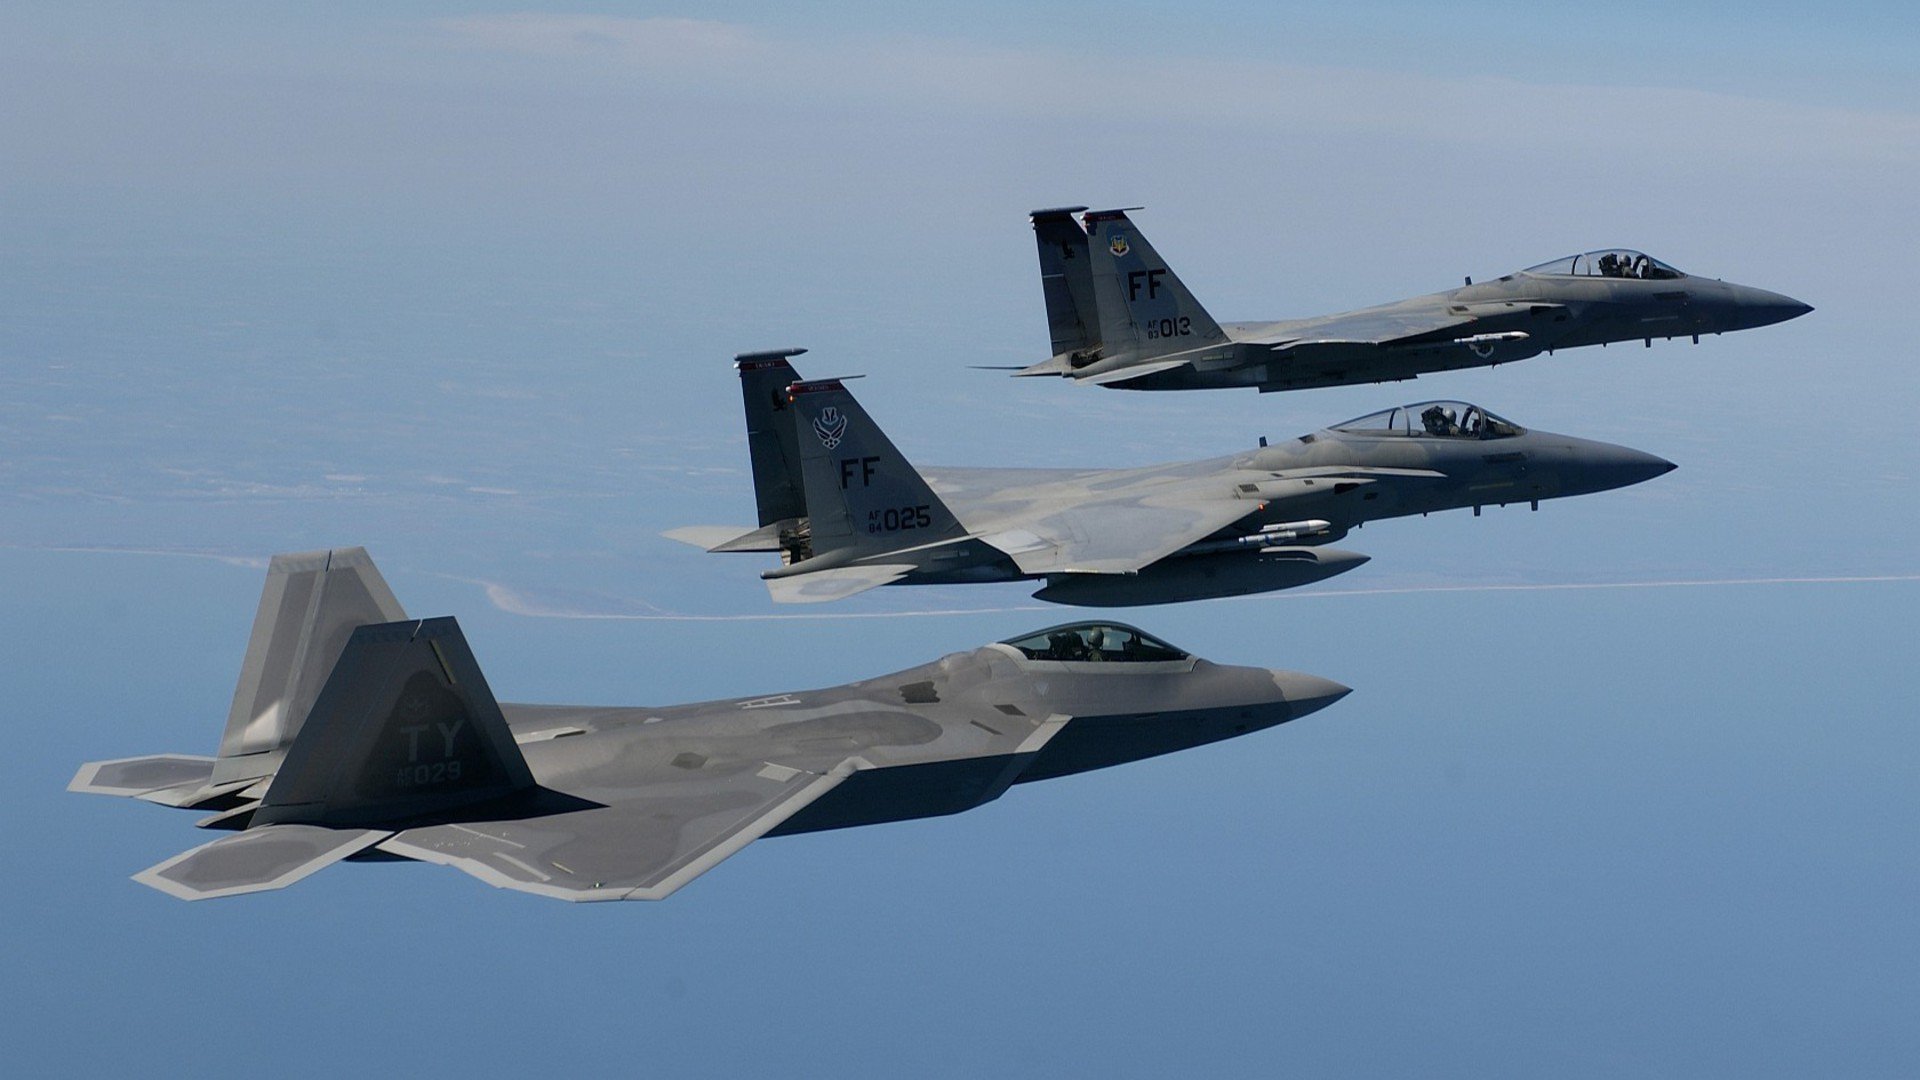 Military Jets 11174 Hd Wallpapers in Aircraft   Imagescicom